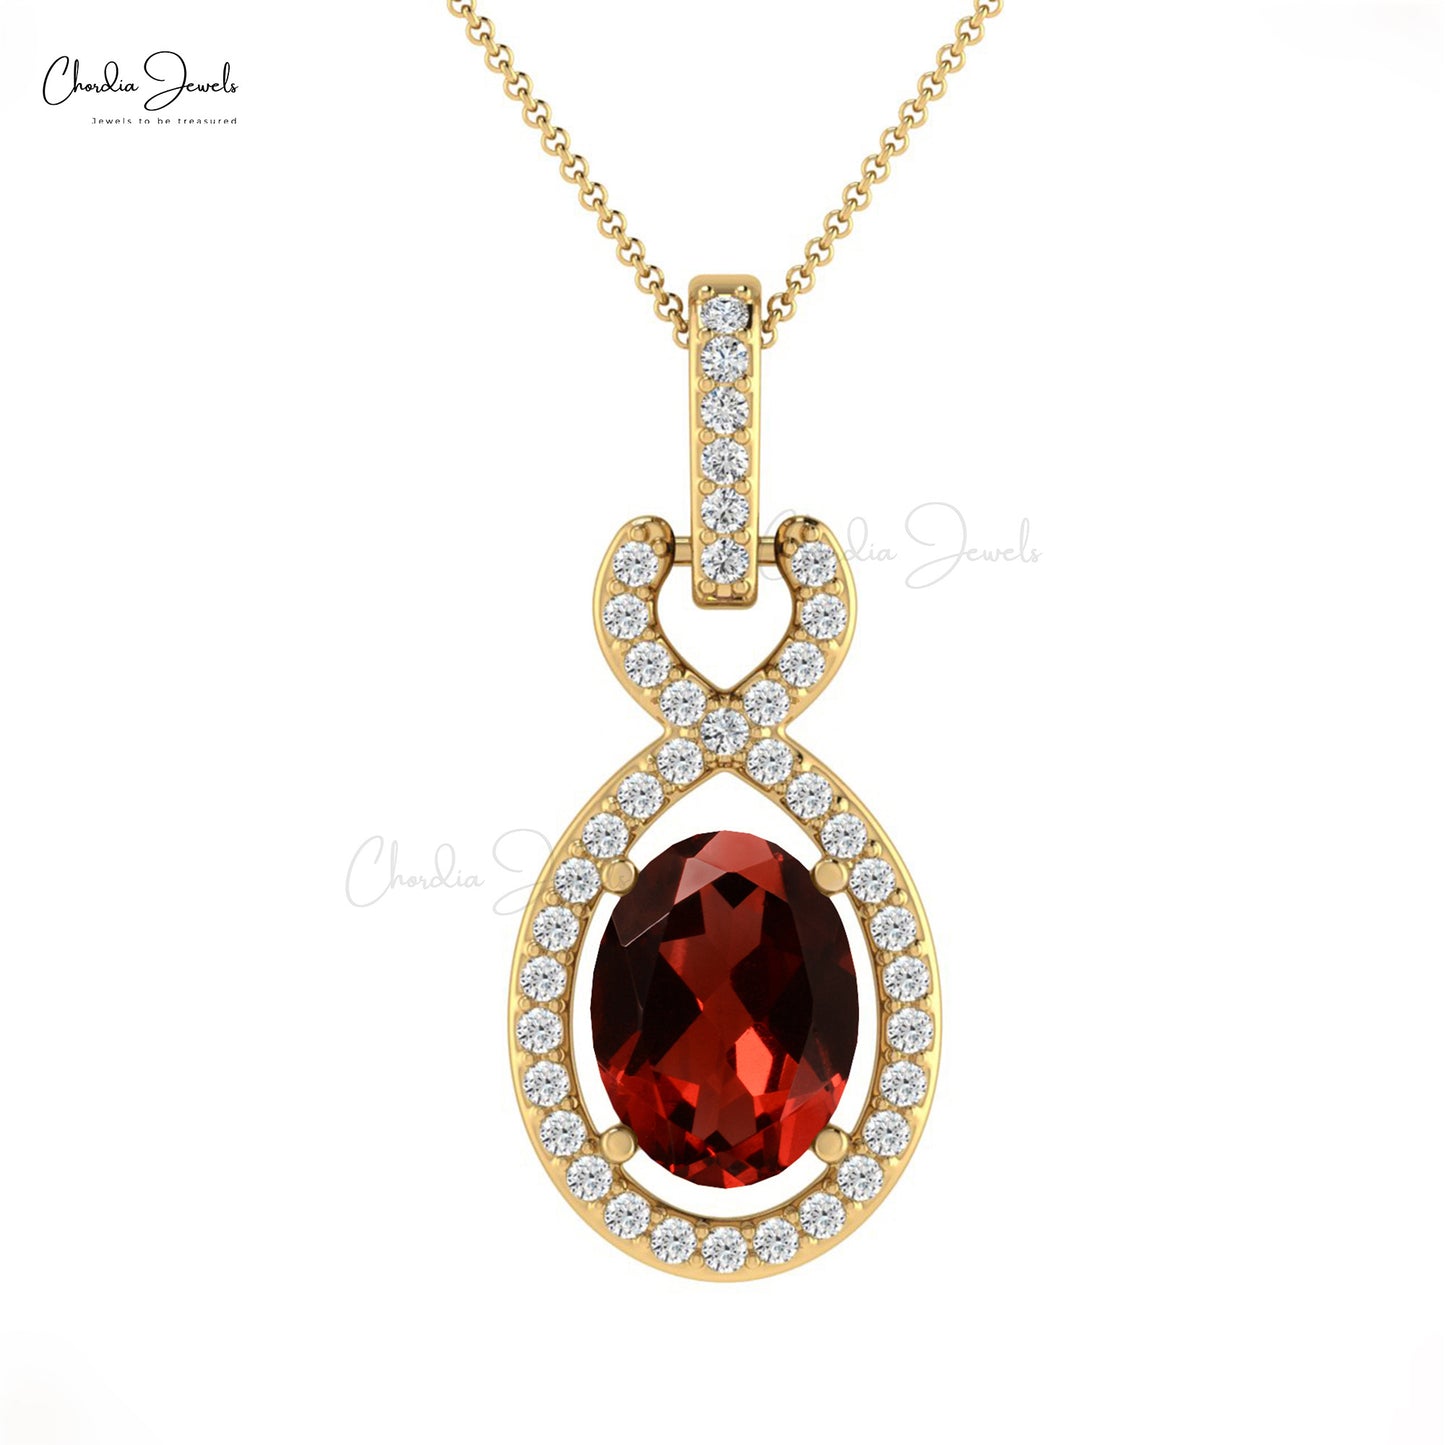 Genuine Red Garnet Gemstone Halo Pendant Necklace With Bail White Diamond Studded Pendant For Women Pure 14k Gold Jewelry For Wedding Gift